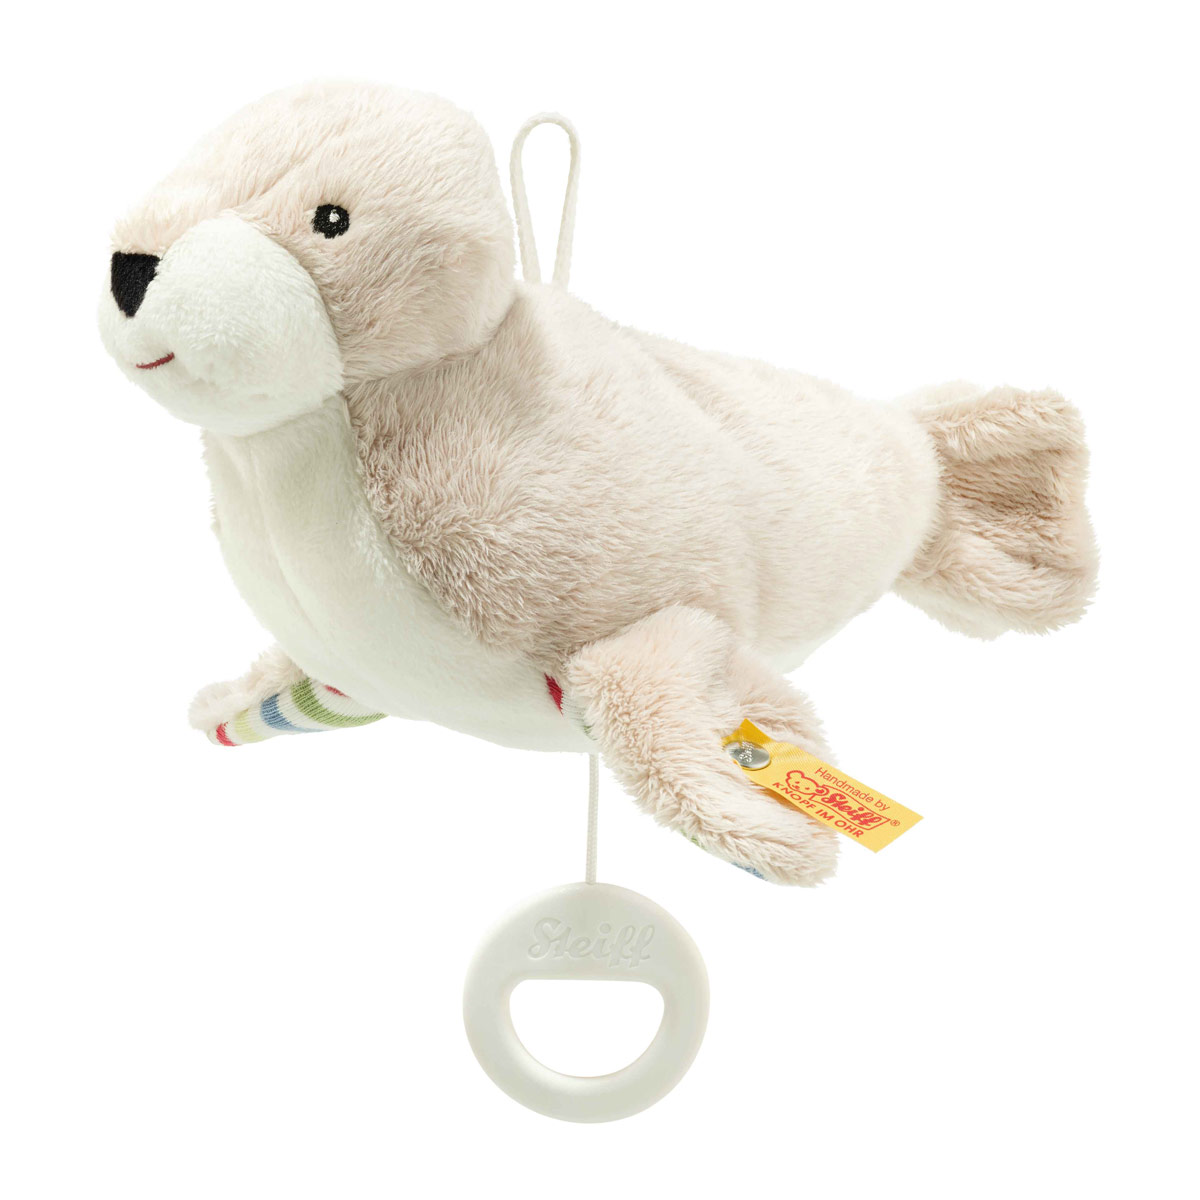 Steiff Baby Wild Sweeties Tamme the Seal Music Box